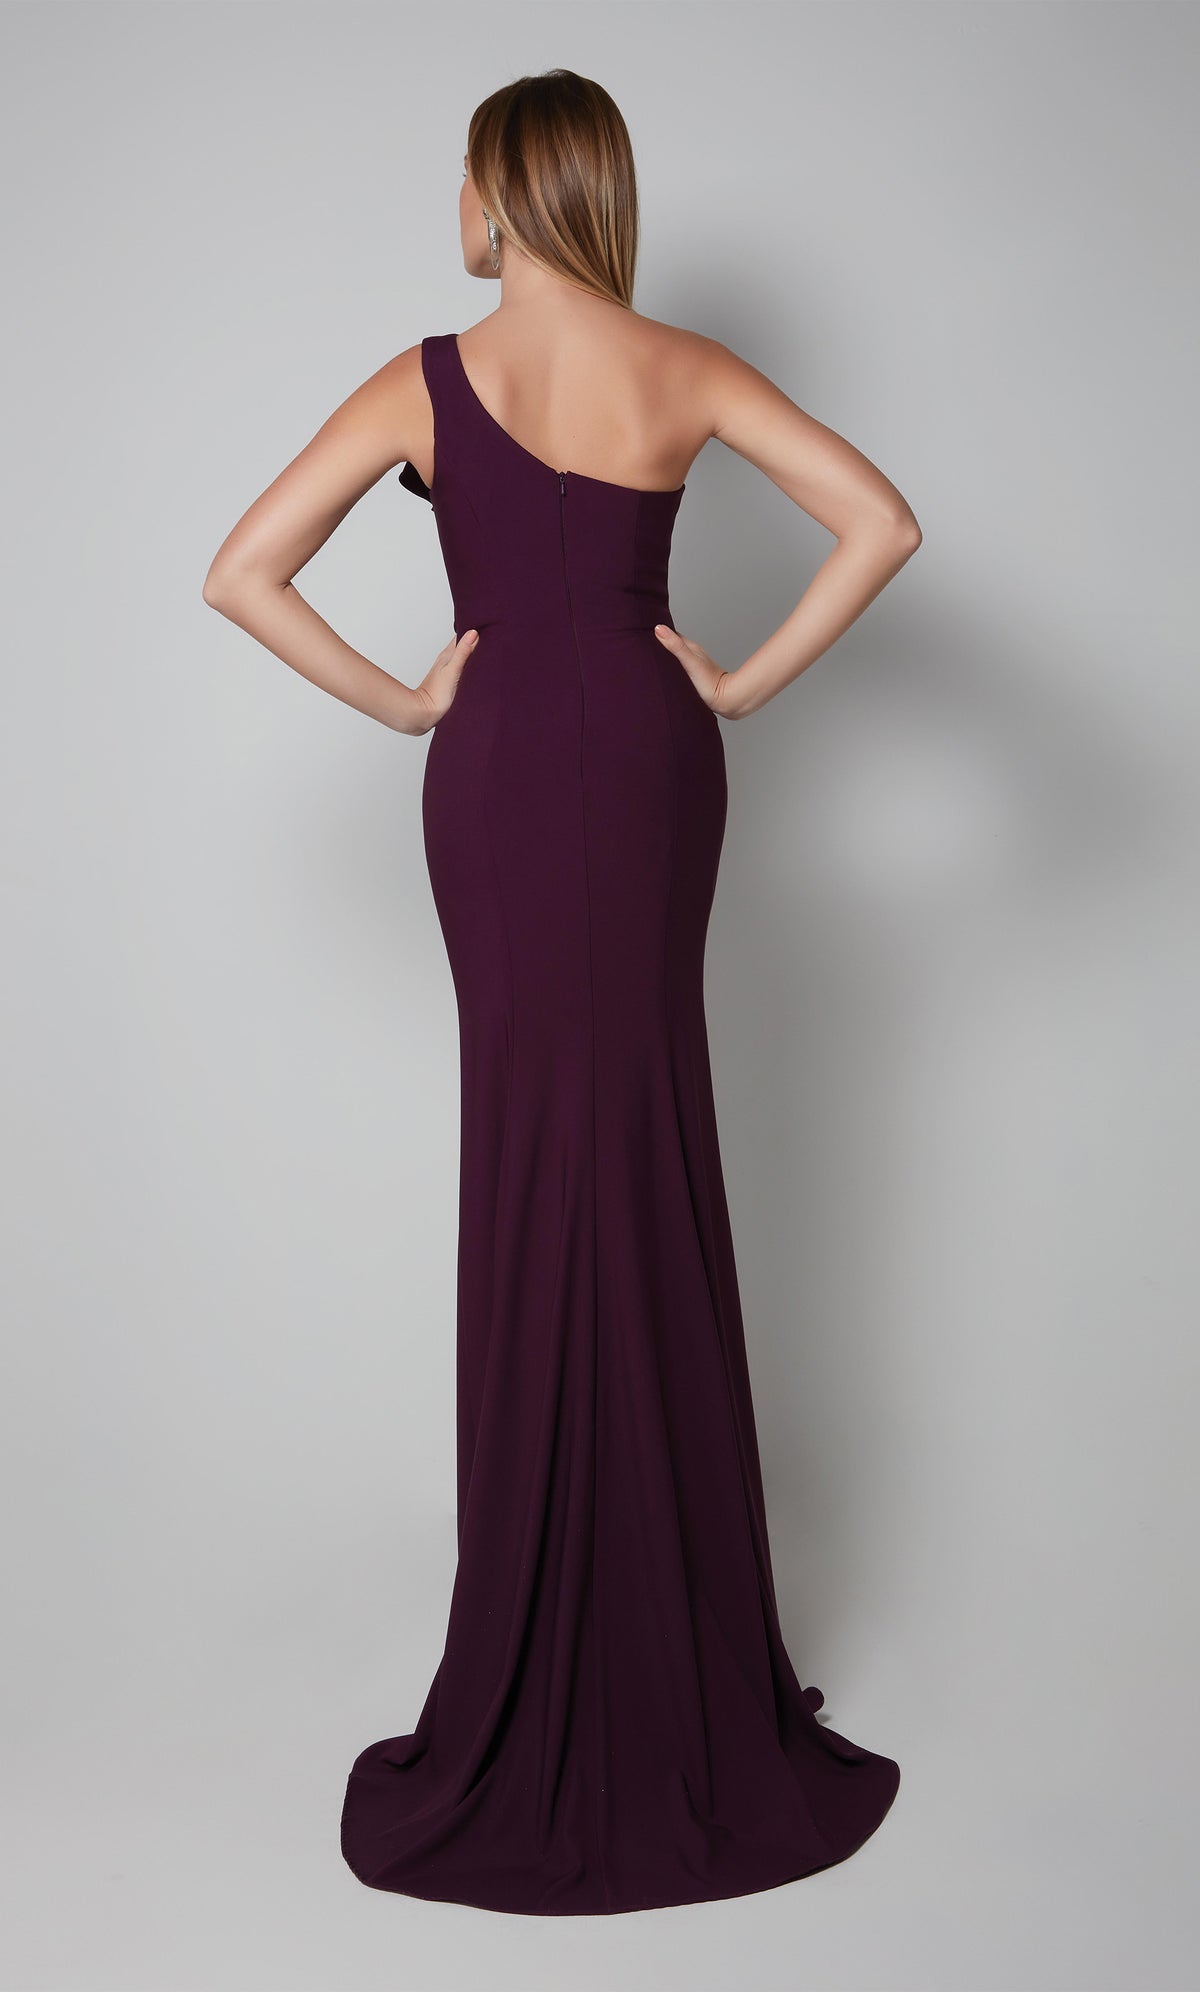 Long one shoulder evening gown with a zip up back and train in purple.